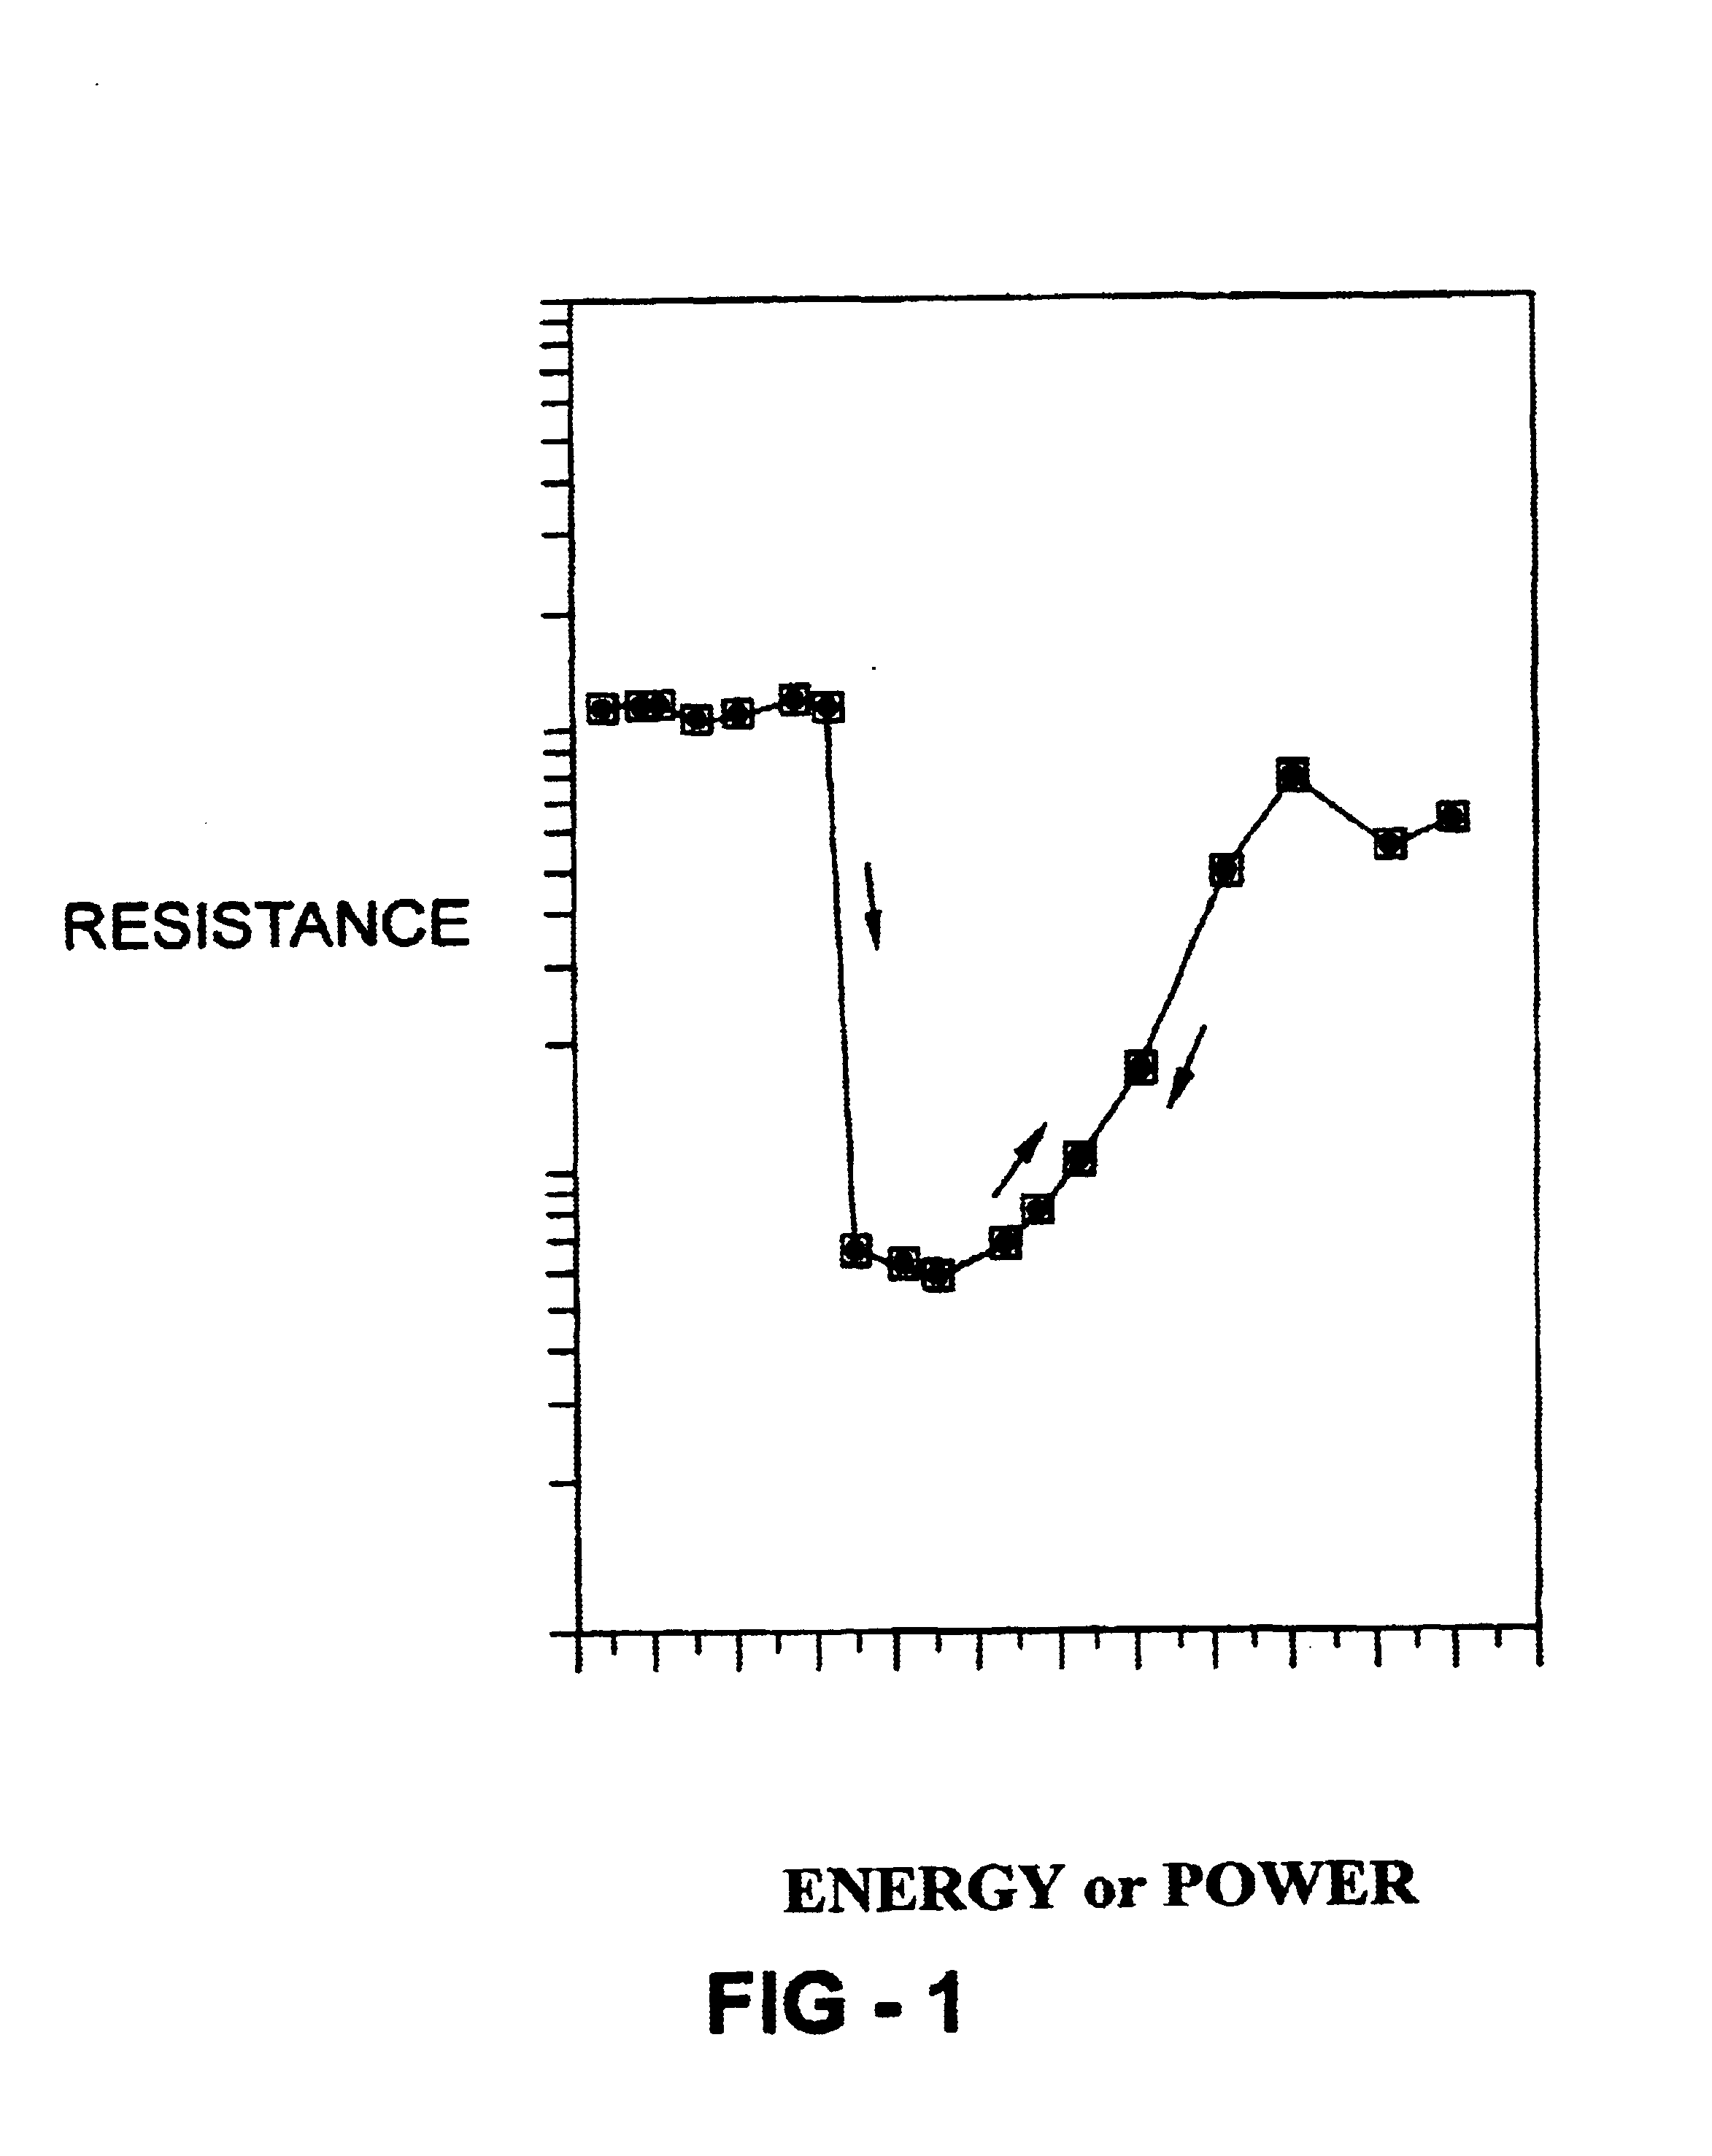 Photonic crystals and devices having tunability and switchability